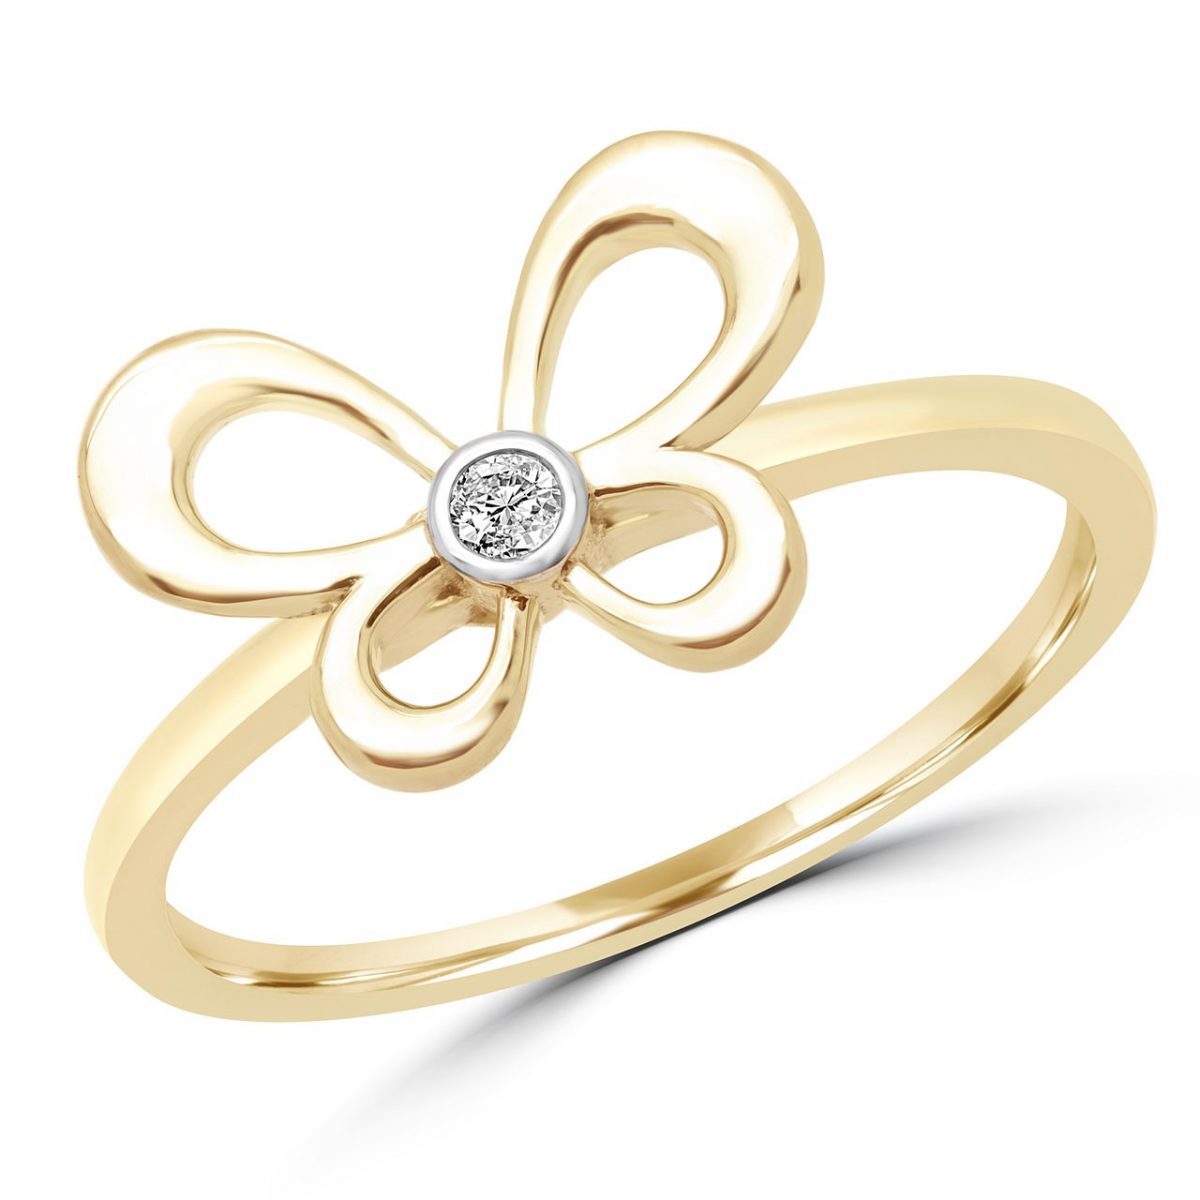 Diamond promise ring butterfly design 0.02 ct 10k yellow gold